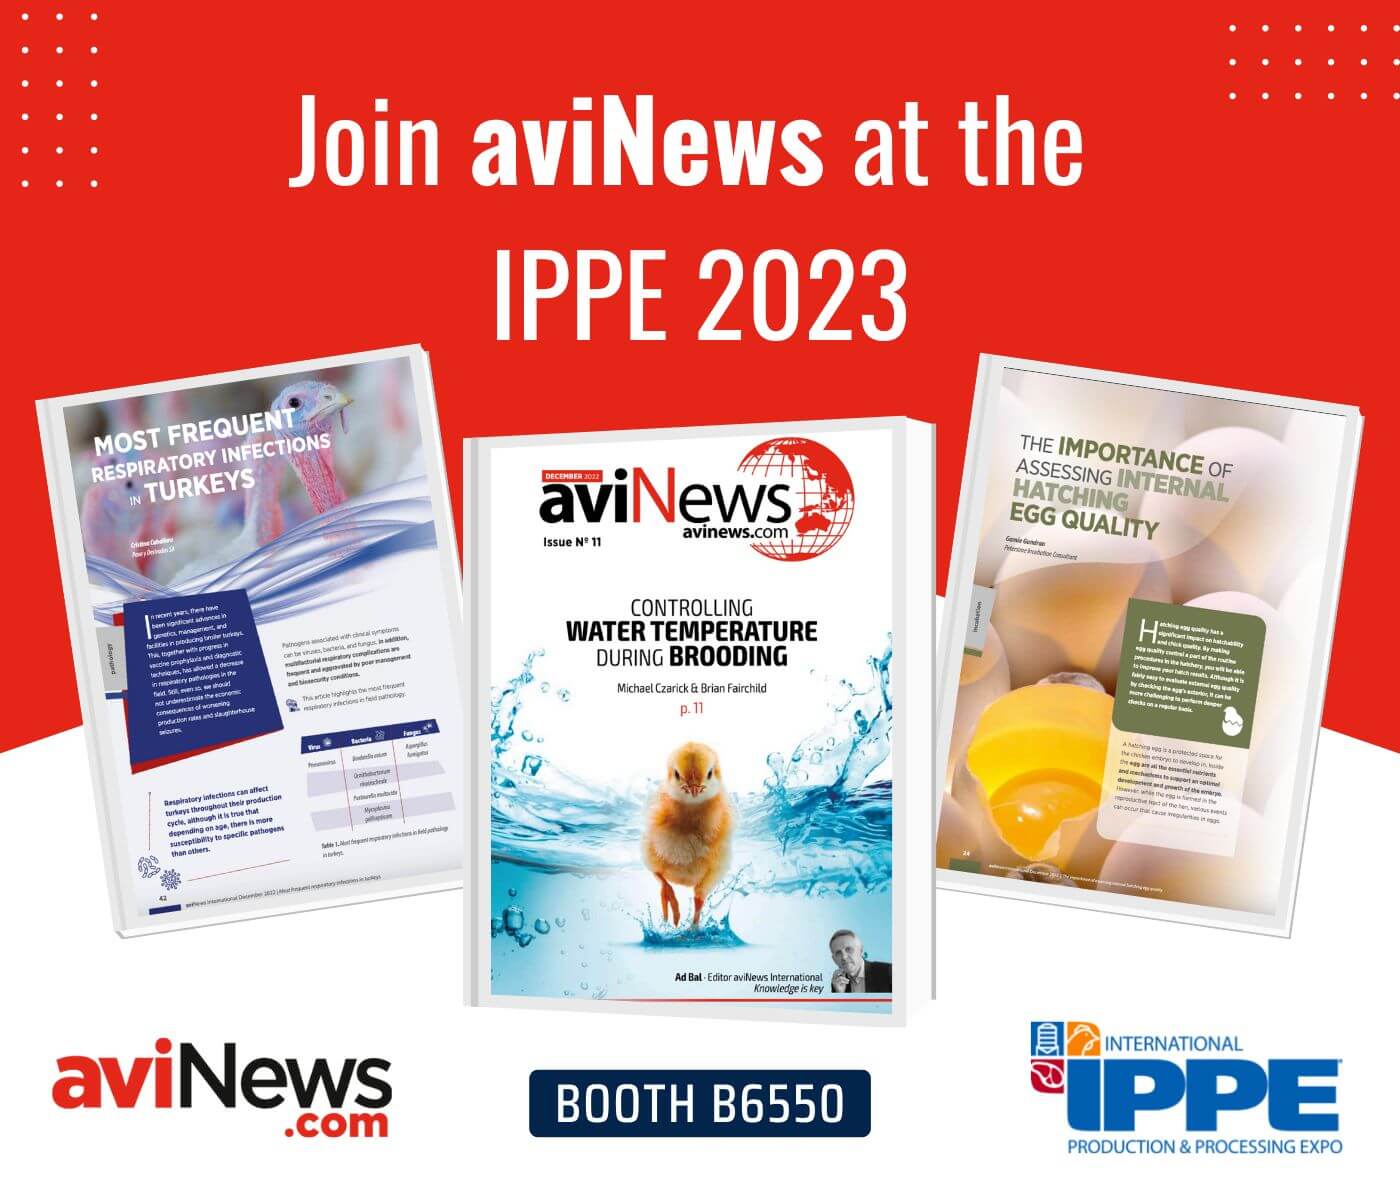 Join aviNews at the IPPE 2023!